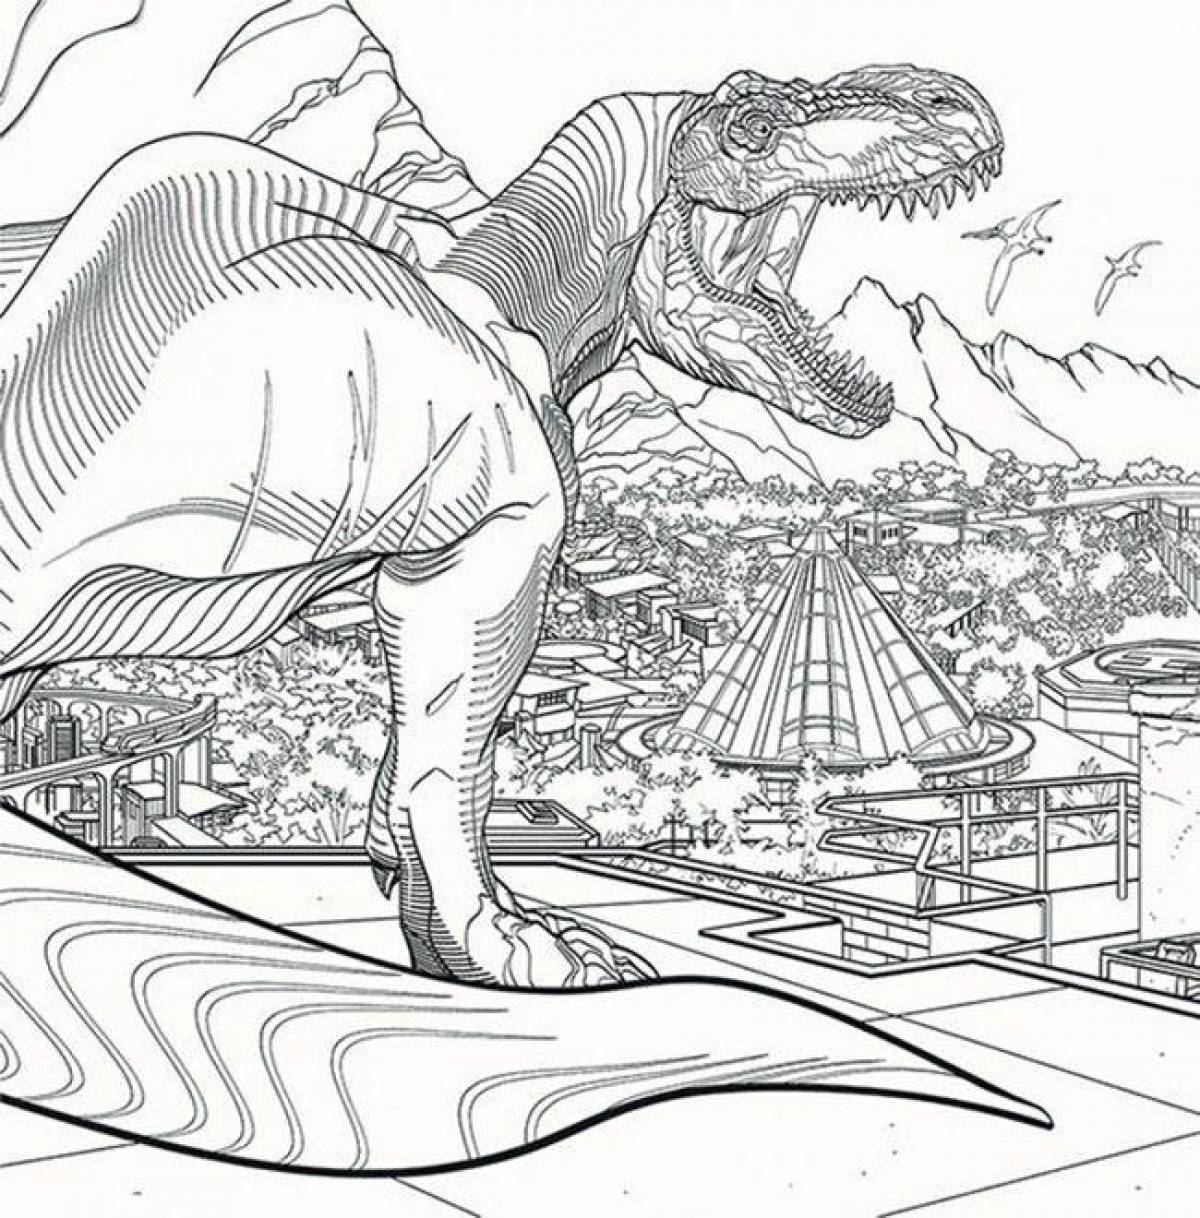 Radiant jurassic park coloring page